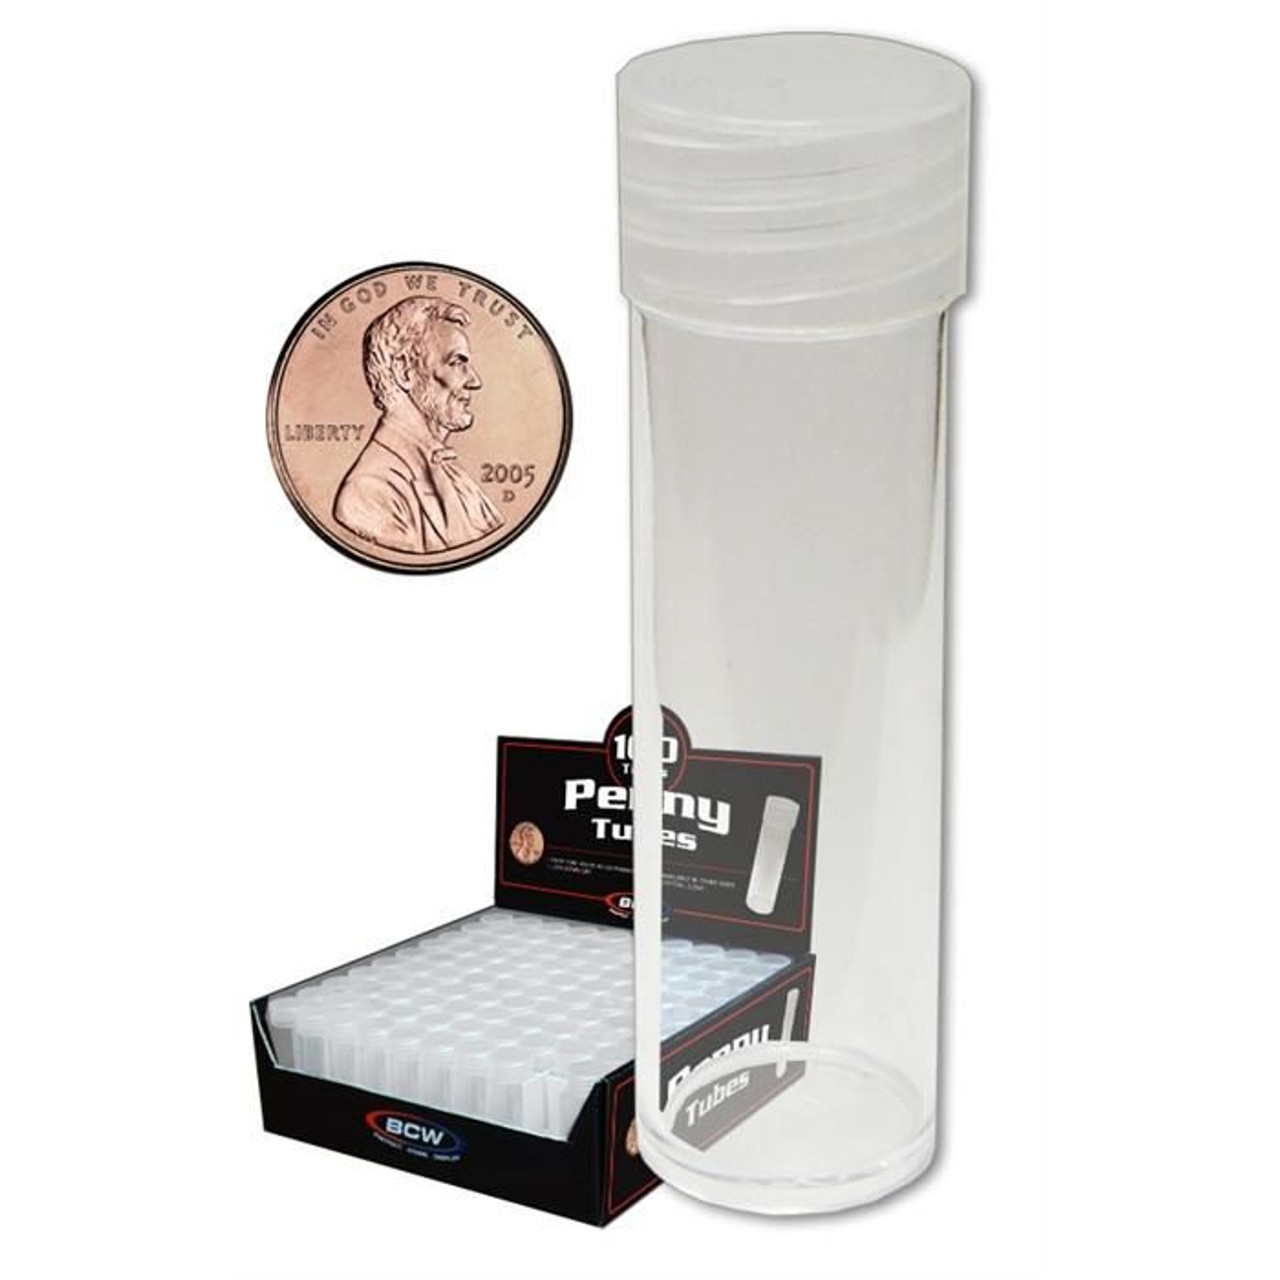 BCW Penny Coin Tubes 100ct Box / Case of 5